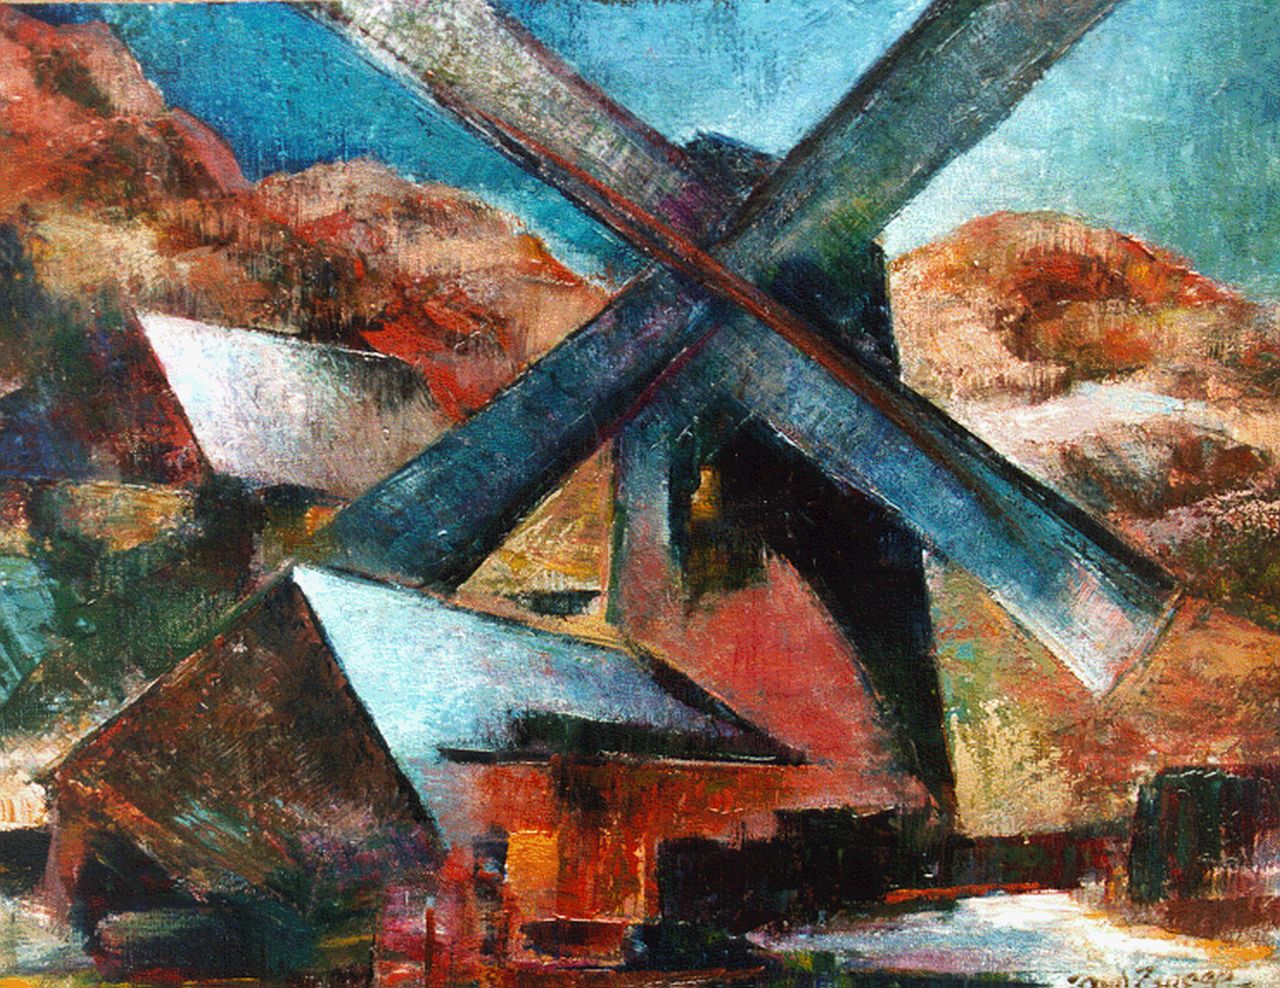 Zweep D.J. van der | 'Douwe' Jan van der Zweep, A windmill in a landscape, oil on canvas laid down on painter's board 28.7 x 38.2 cm, signed l.r. and dated '51